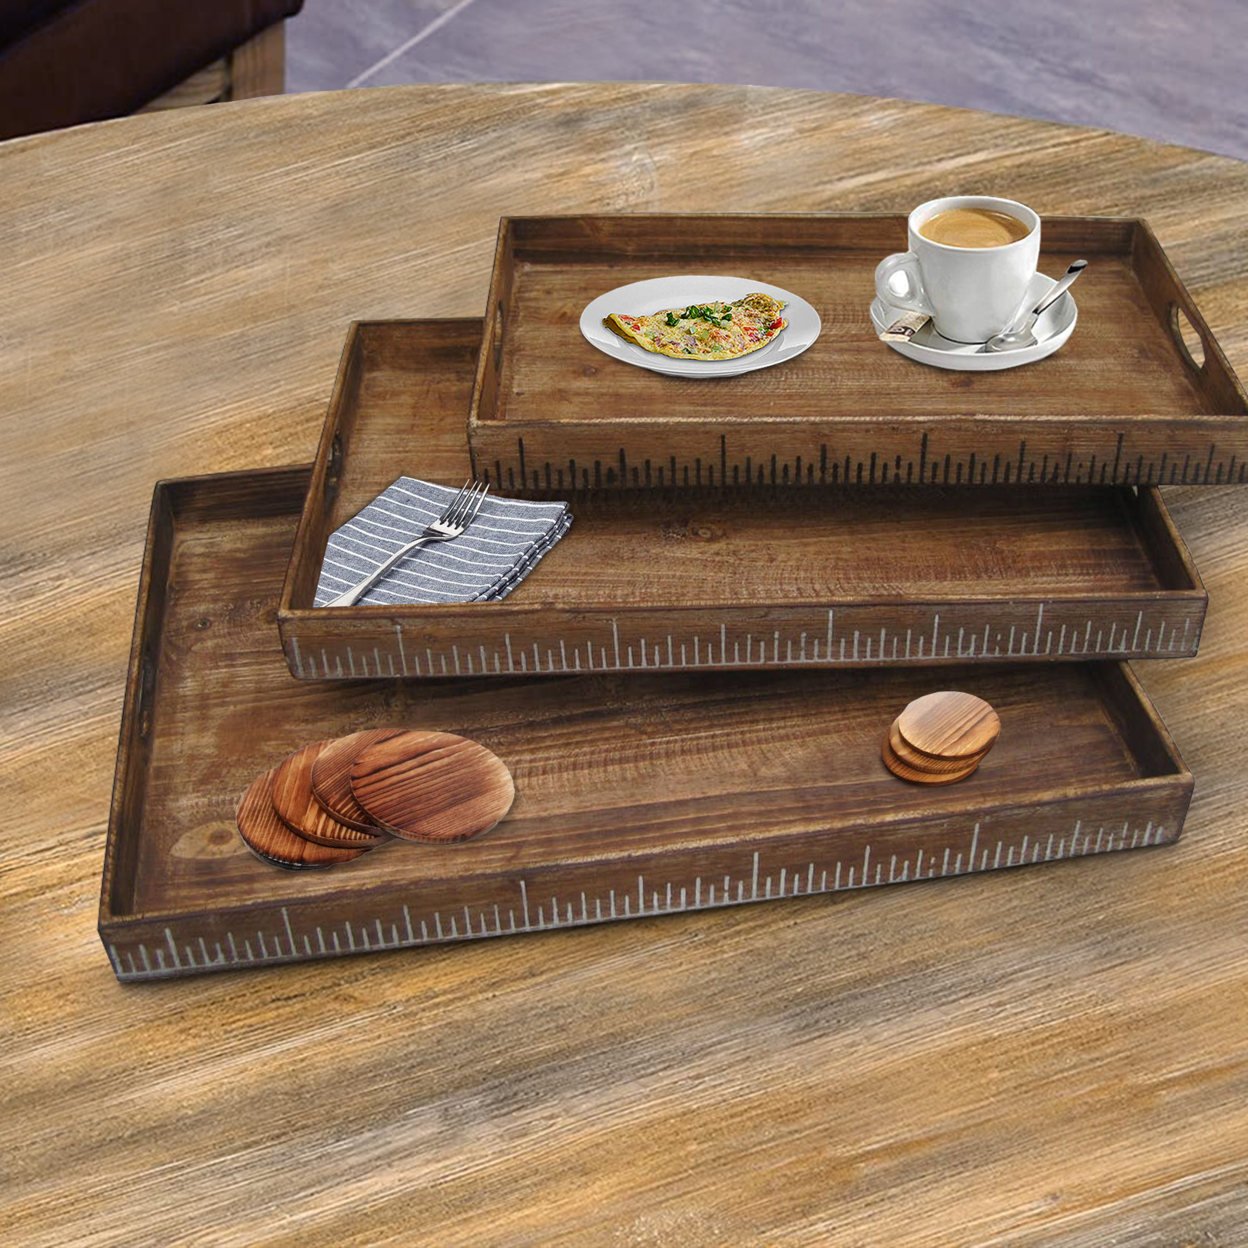 Wooden Tray With Grain Details And Cut Out Handles, Set Of 3, Brown- Saltoro Sherpi